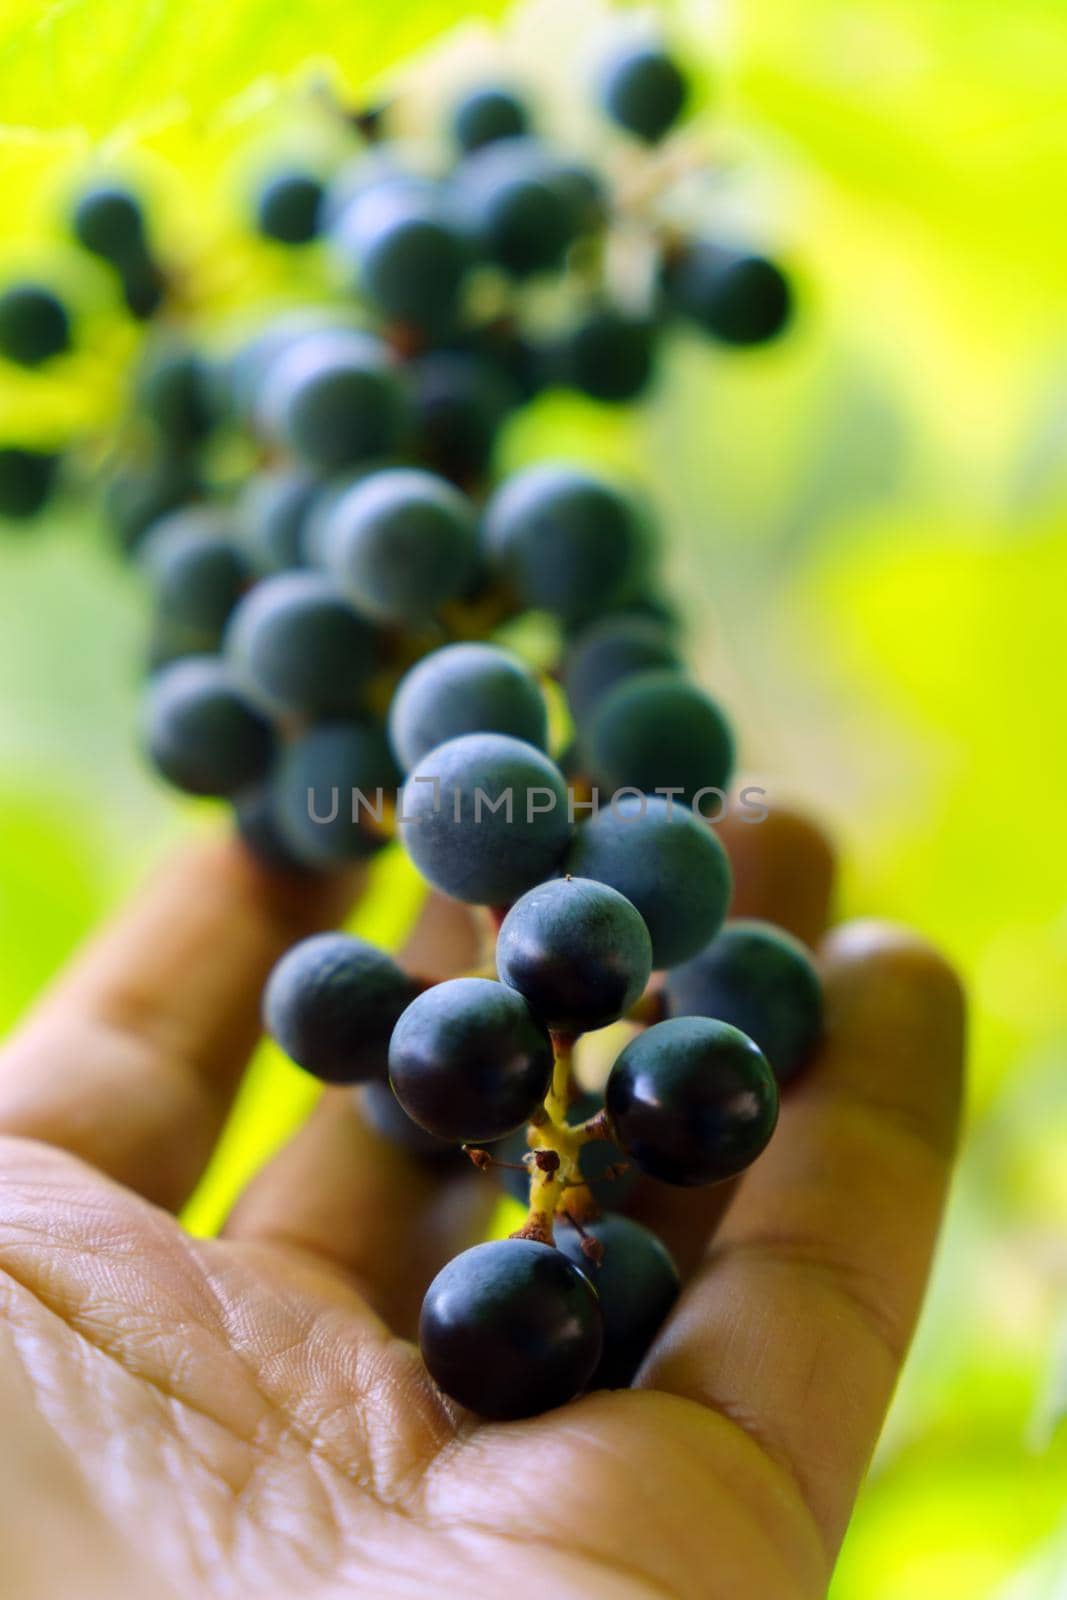 Black grapes on the branches of the vineyard close-up. Selective focus. Grape growing and wine making